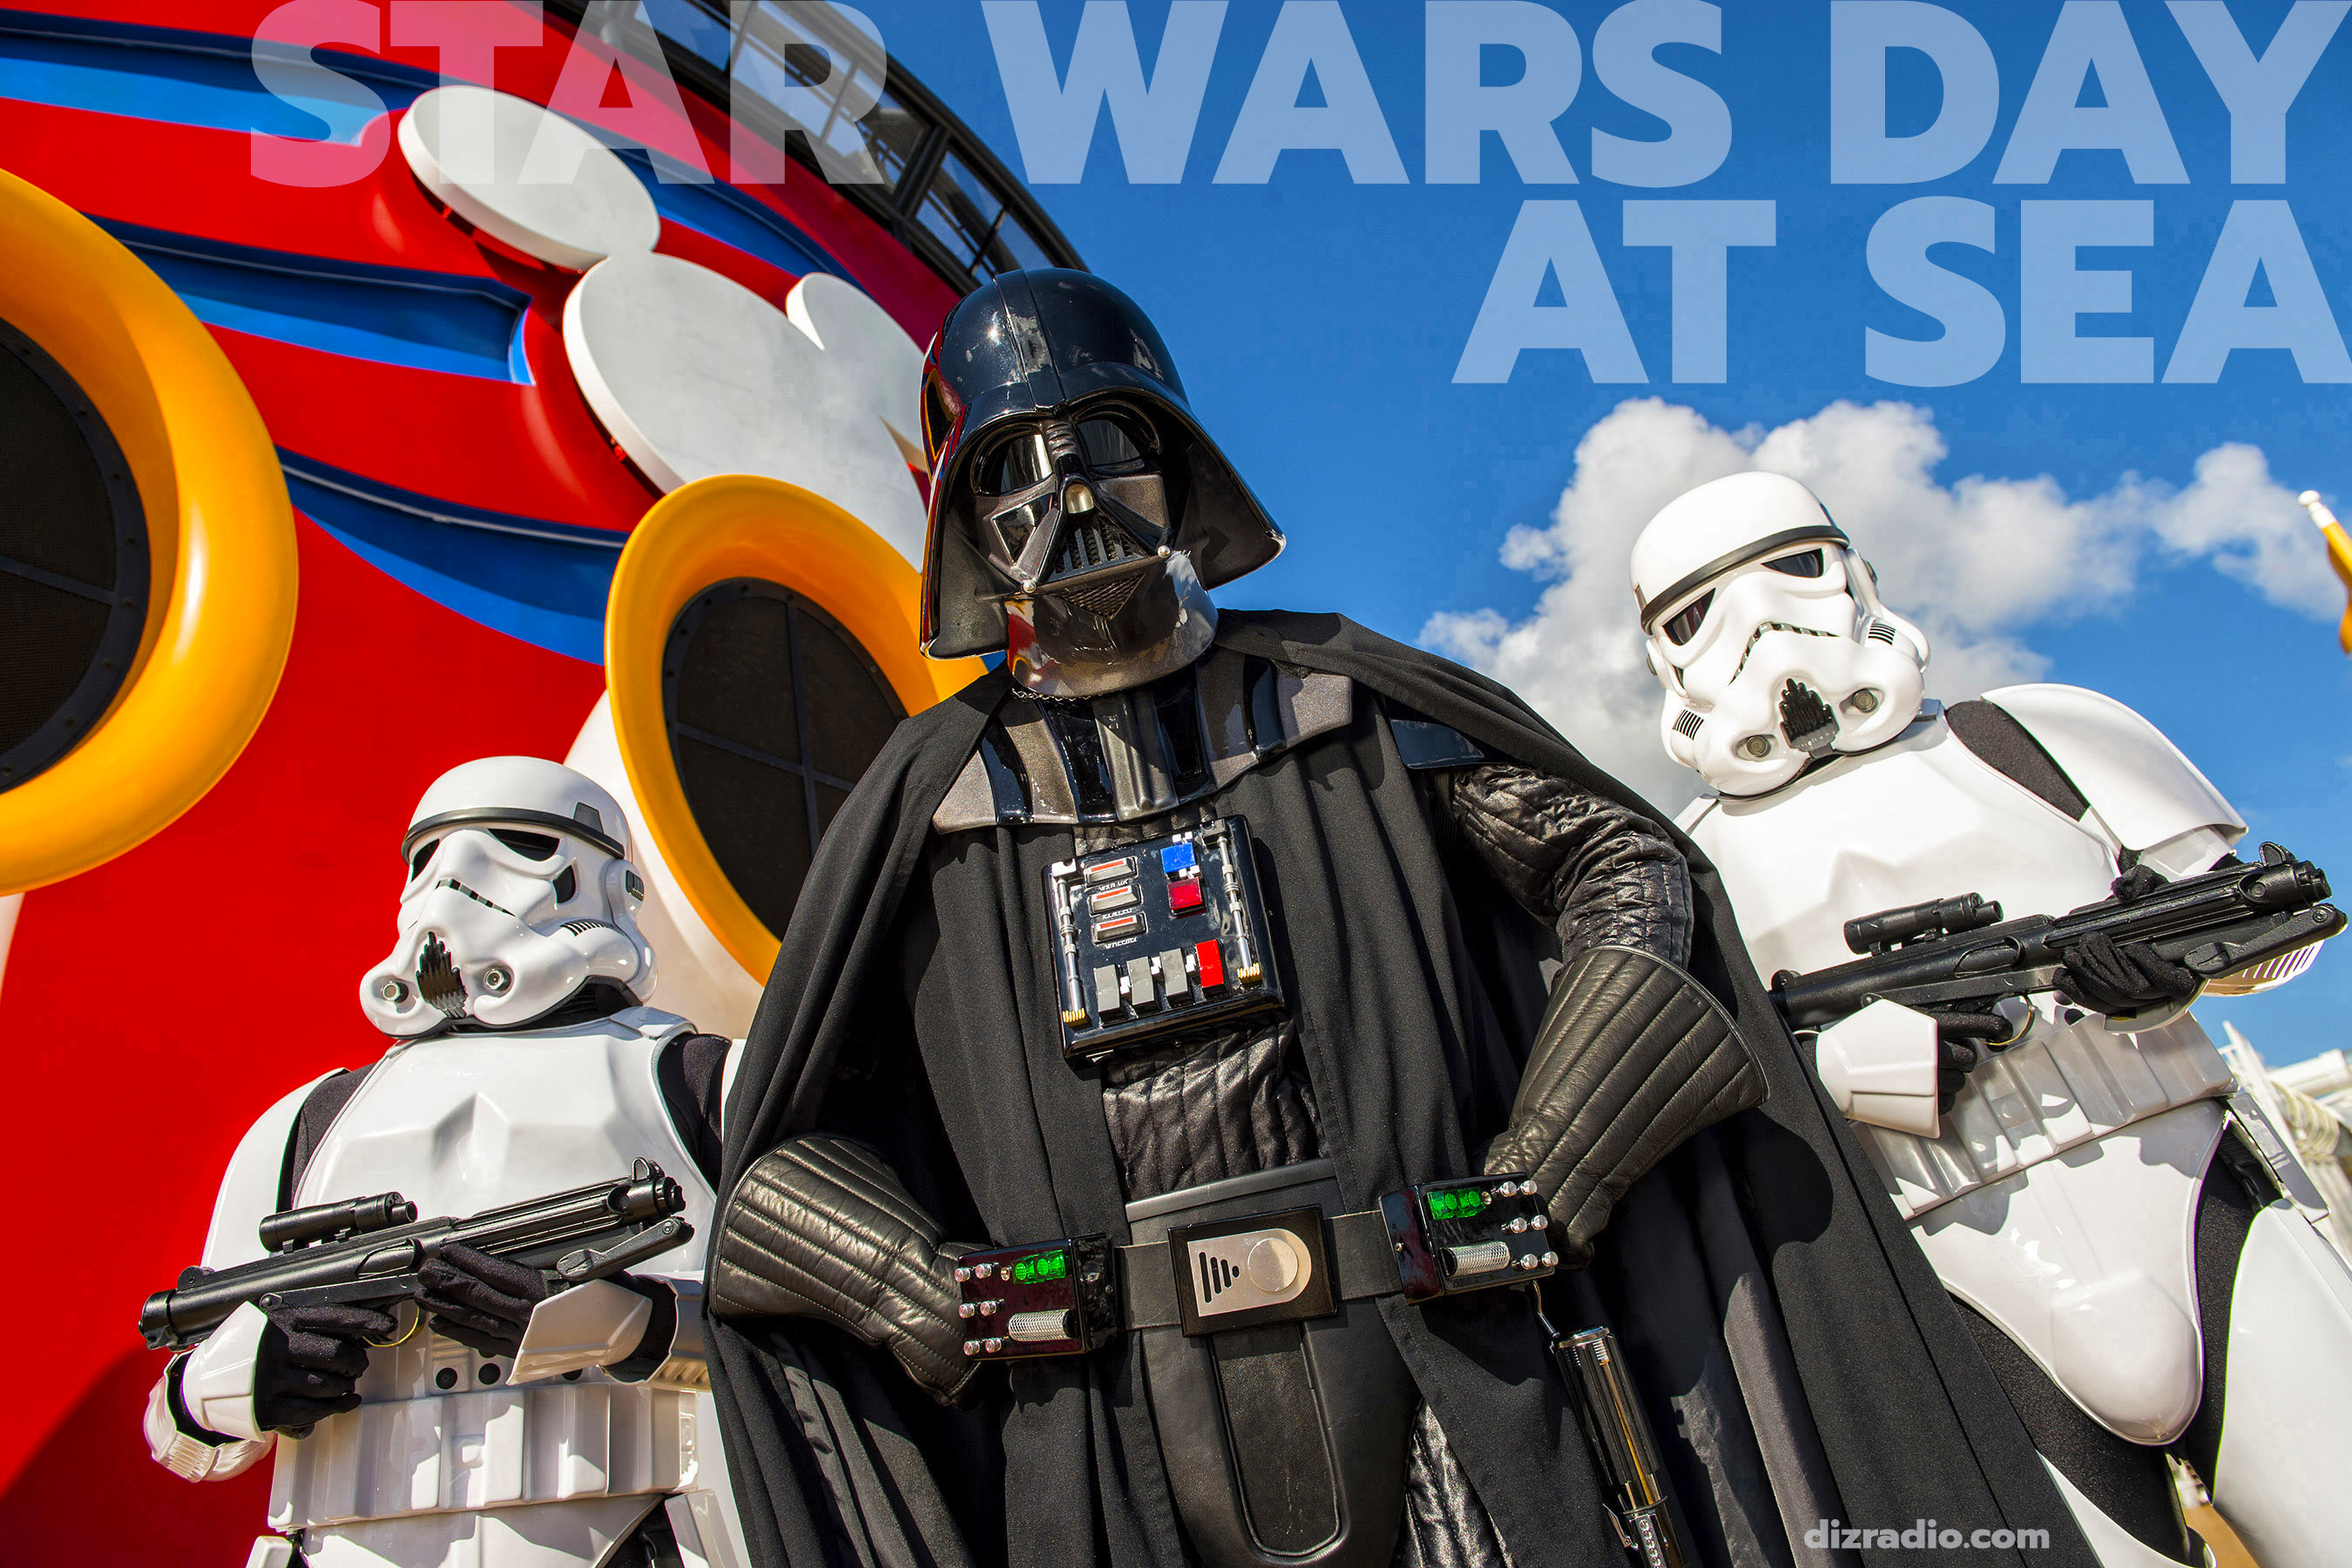 Disney Cruise Line guests can experience the legendary adventures and iconic characters from the Star Wars saga aboard a Disney Cruise Line ship in a day-long celebration: Star Wars Day at Sea. The event combines the power of the Force, the magic of Disney and the excitement of cruising for an out-of-this-galaxy experience unlike any other. (Matt Stroshane, photographer)